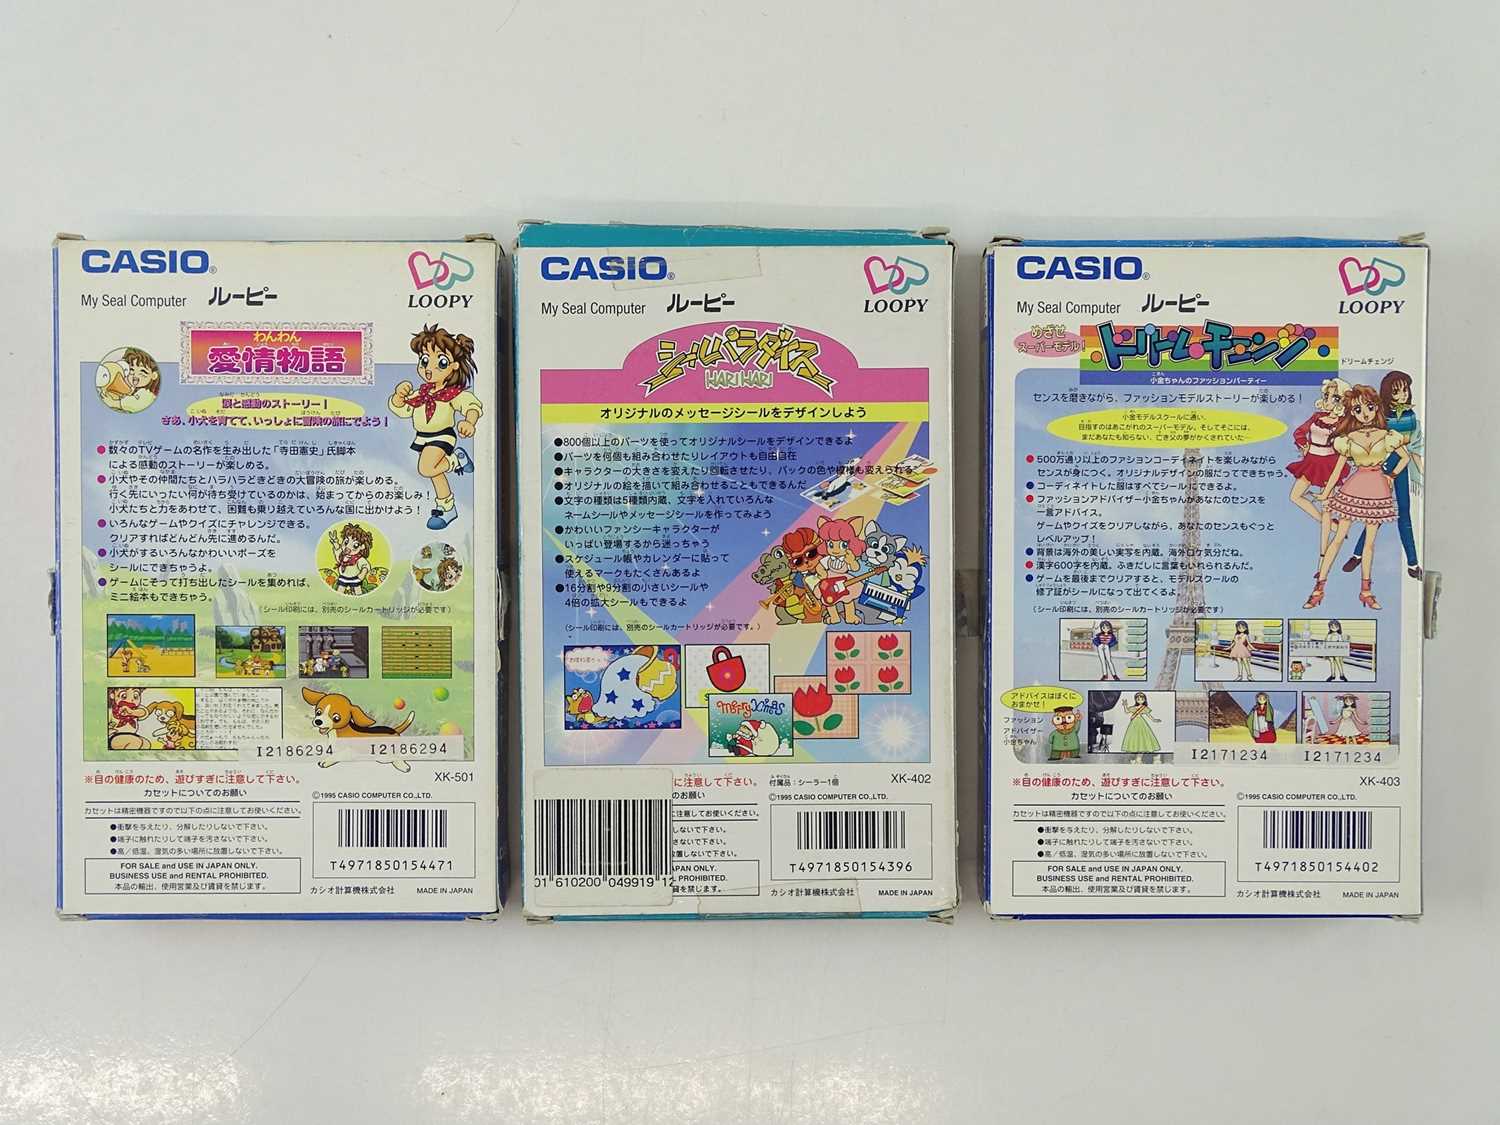 Casio Loopy My Seal Computer games - Bow-wow Puppy Love Story, HARIHARI Seal Paradise, and Dream - Image 2 of 2